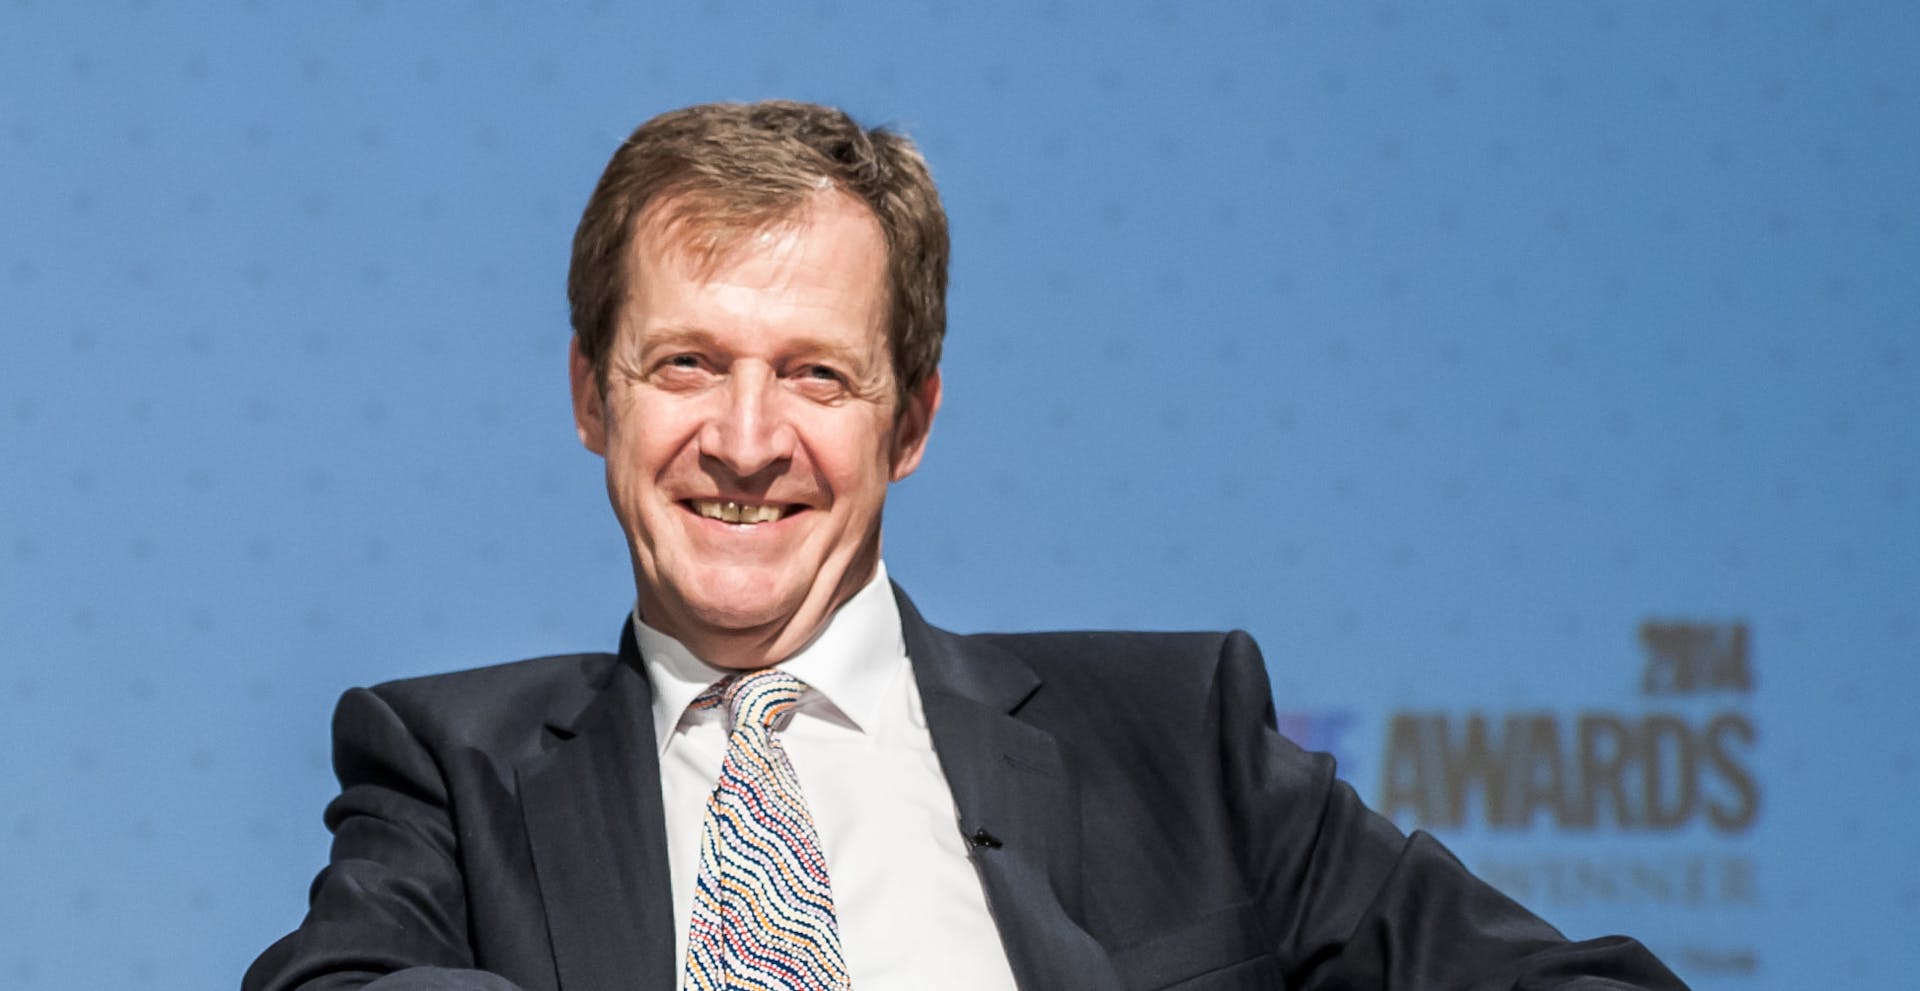 Alastair Campbell: It's time to talk mental health strategy